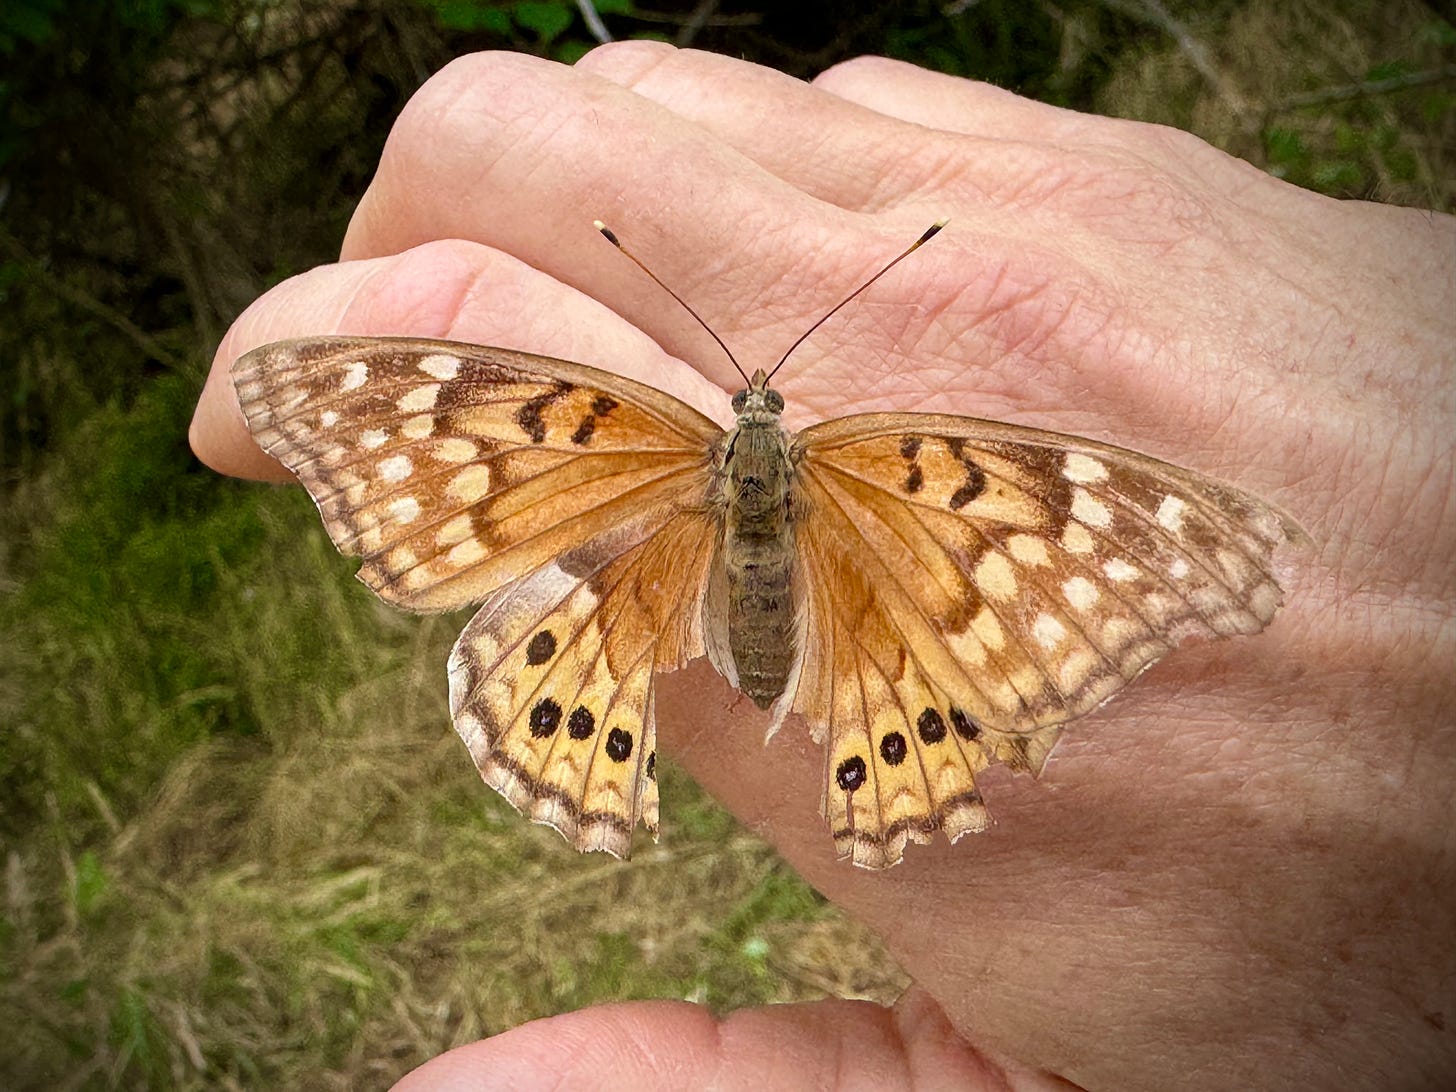 Butterfly with damaged hindwings on the author's hand